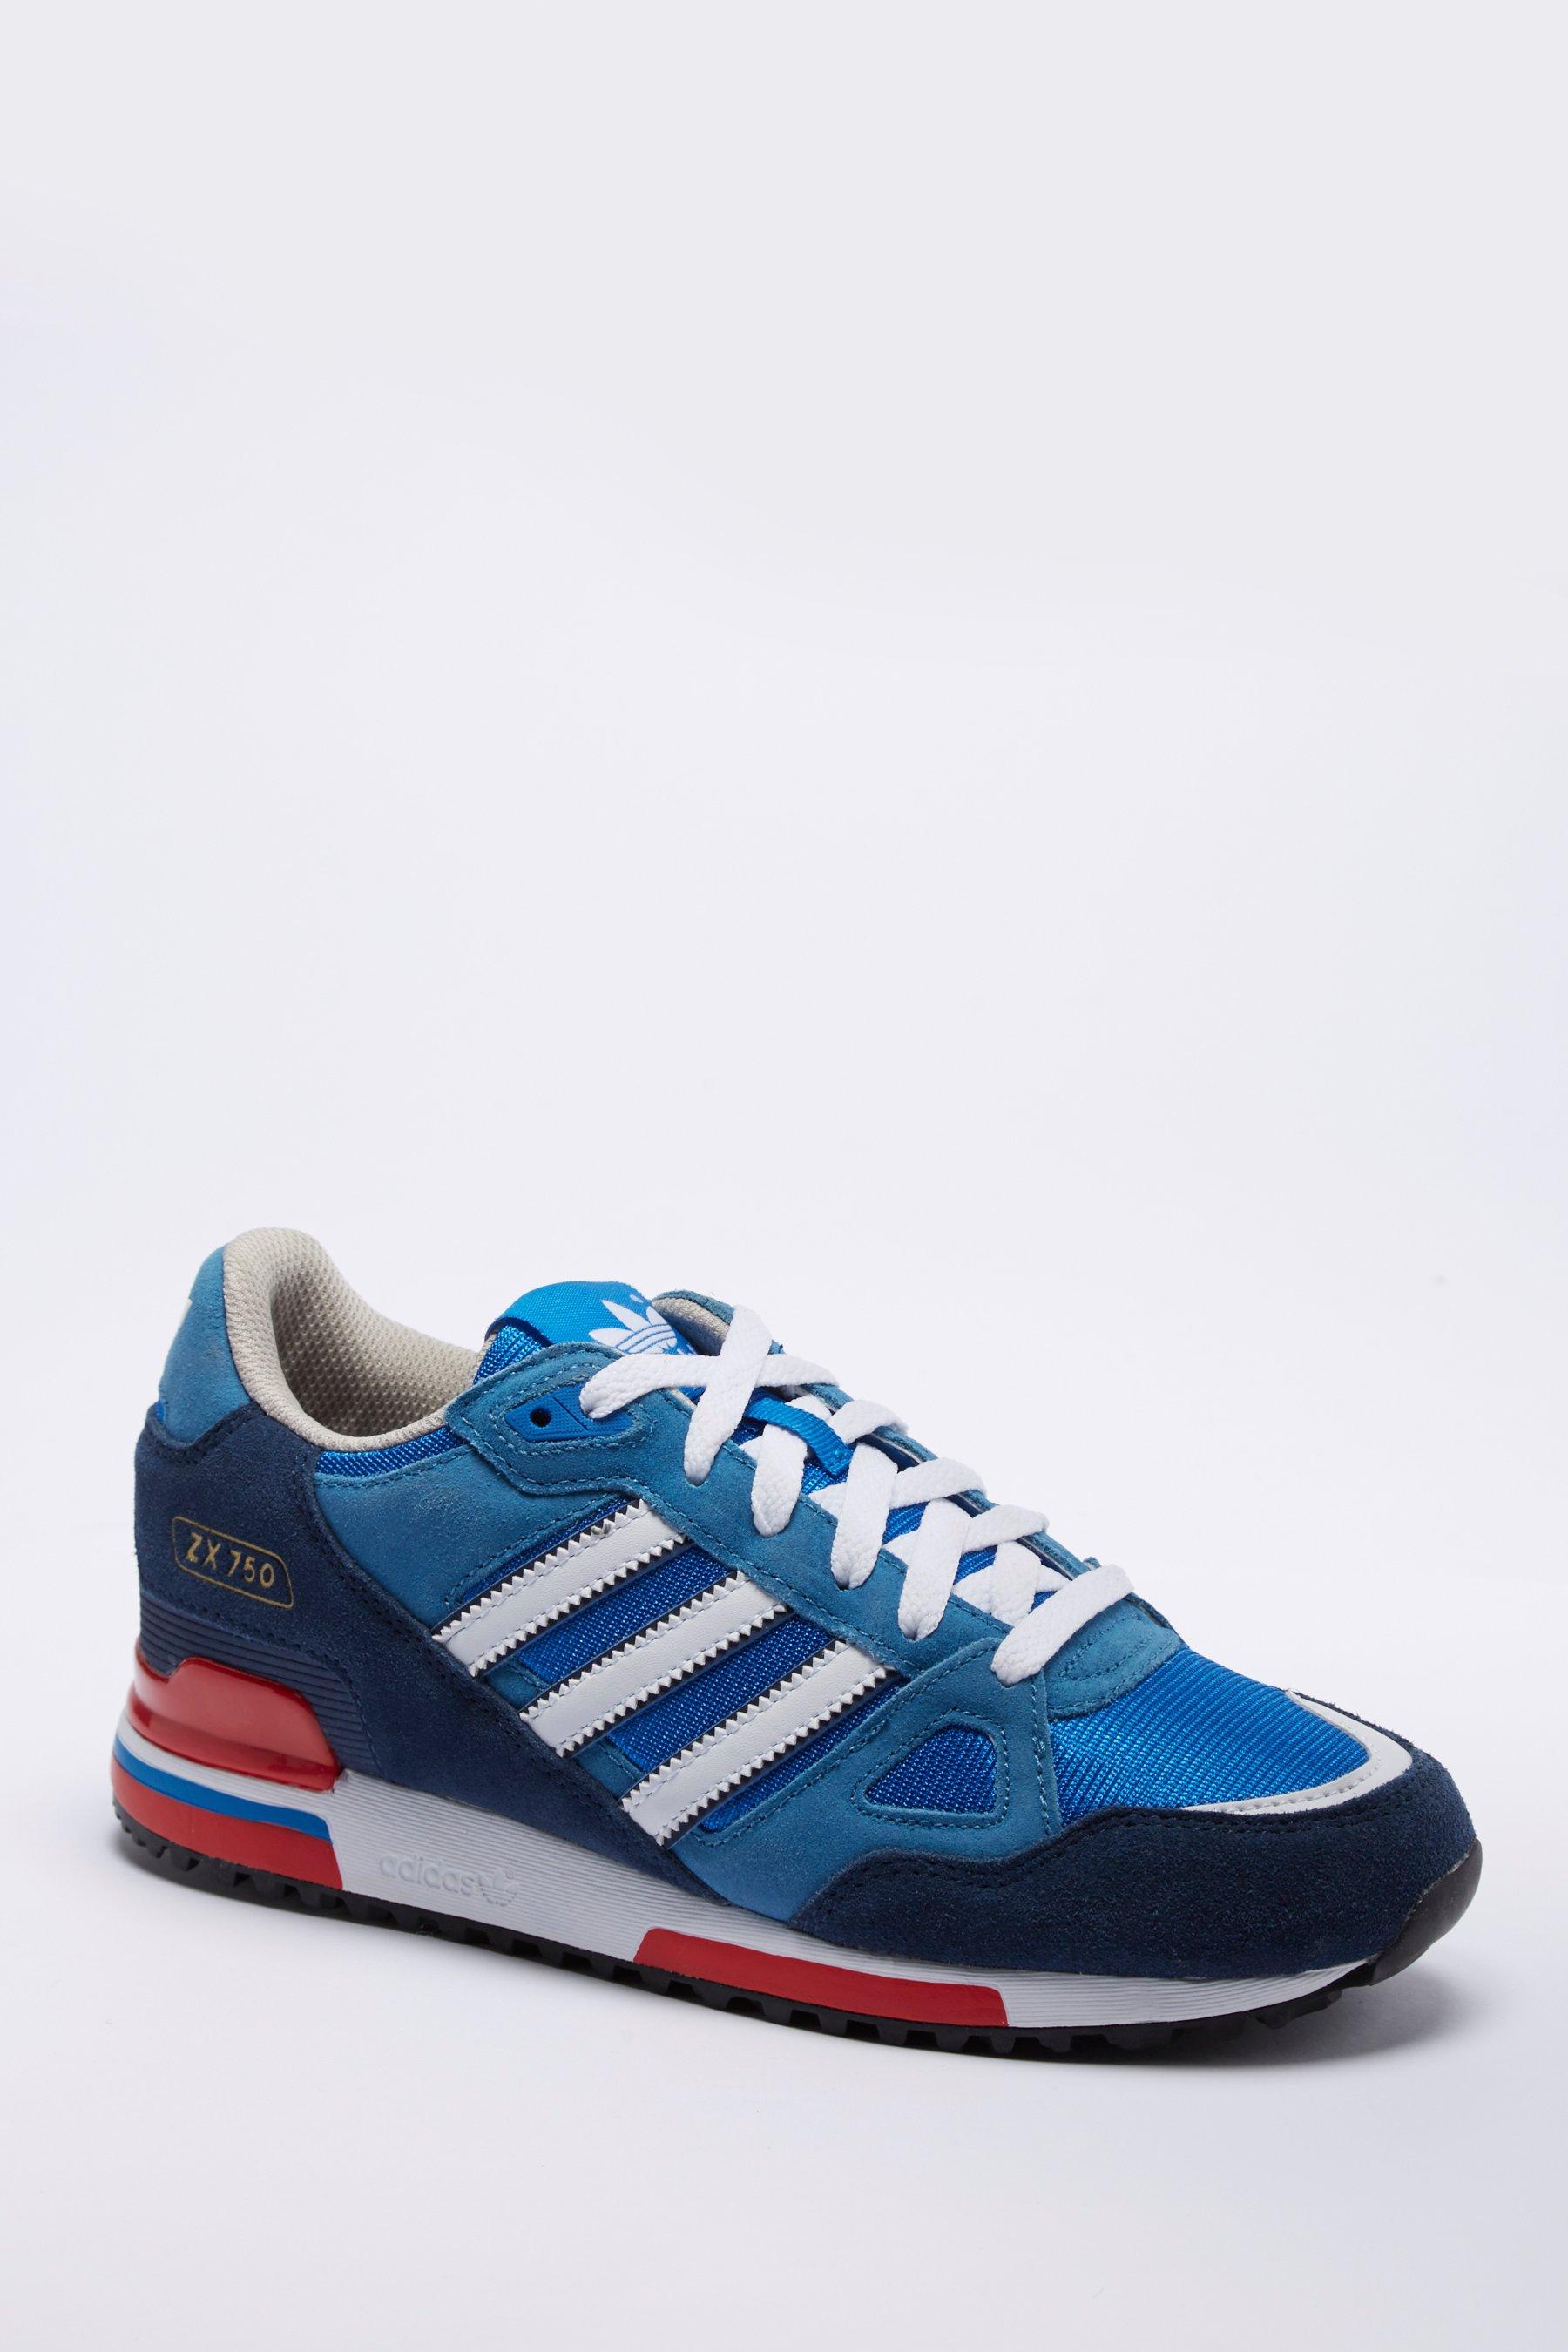 zx 750 trainers